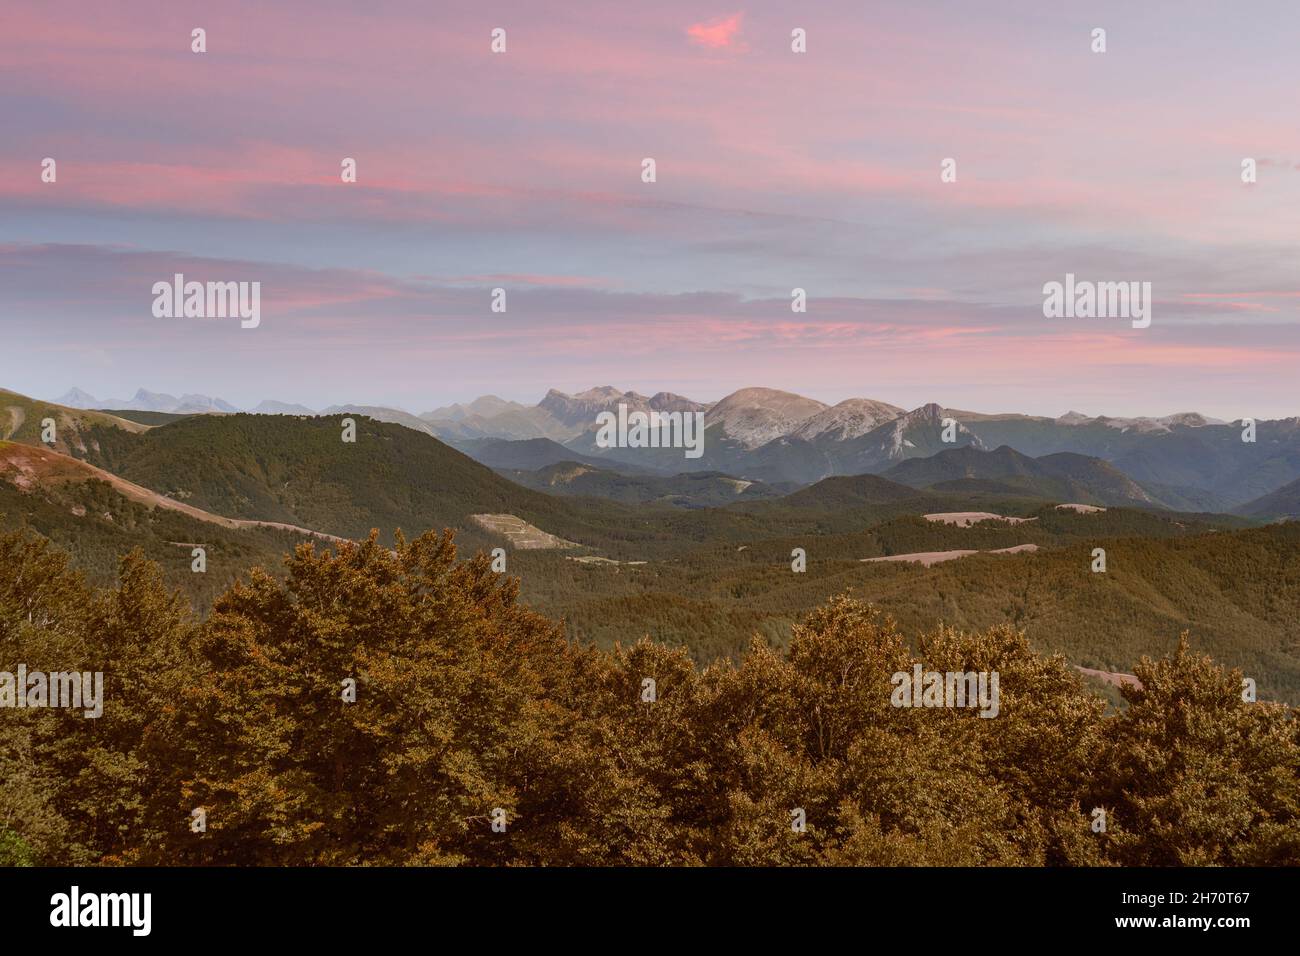 Amazing mountains landscape at sunset.Travel background.Mount Larrau in Pyrenees,near Irati forest between Spain France border. Stock Photo